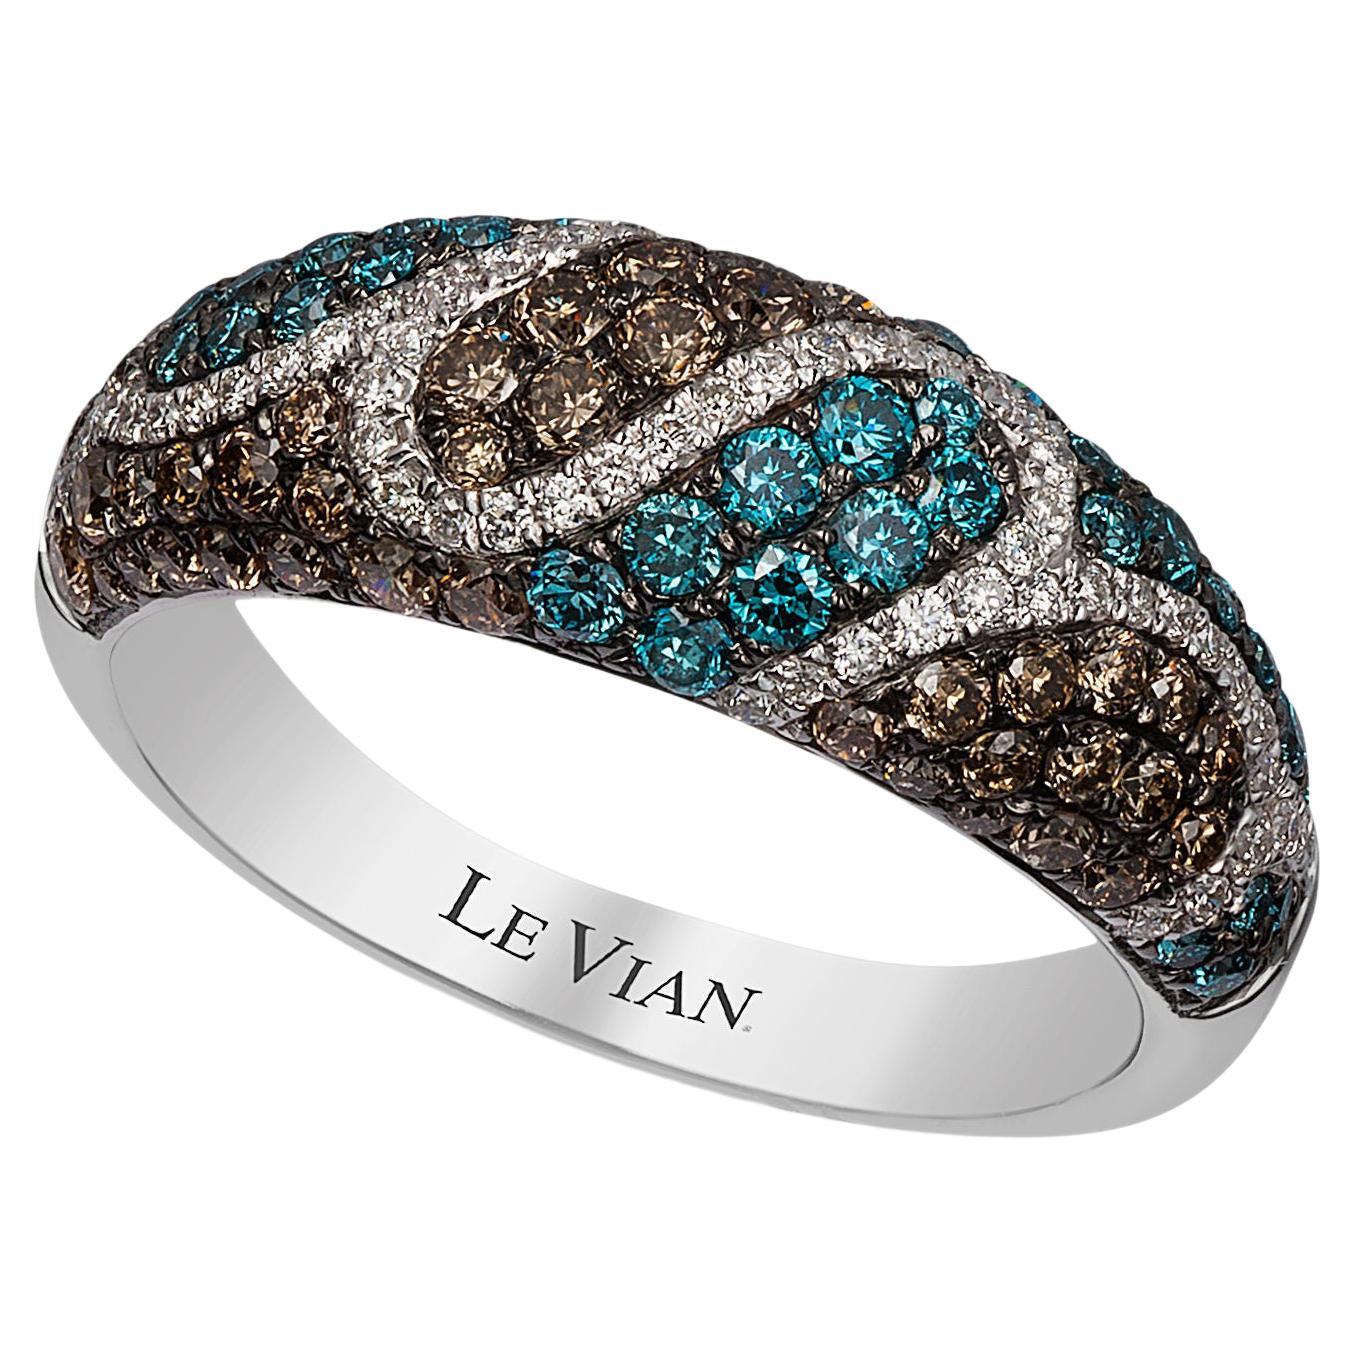 LeVian Ring Blue, Chocolate, and White Diamonds Set in 14K White Gold For Sale